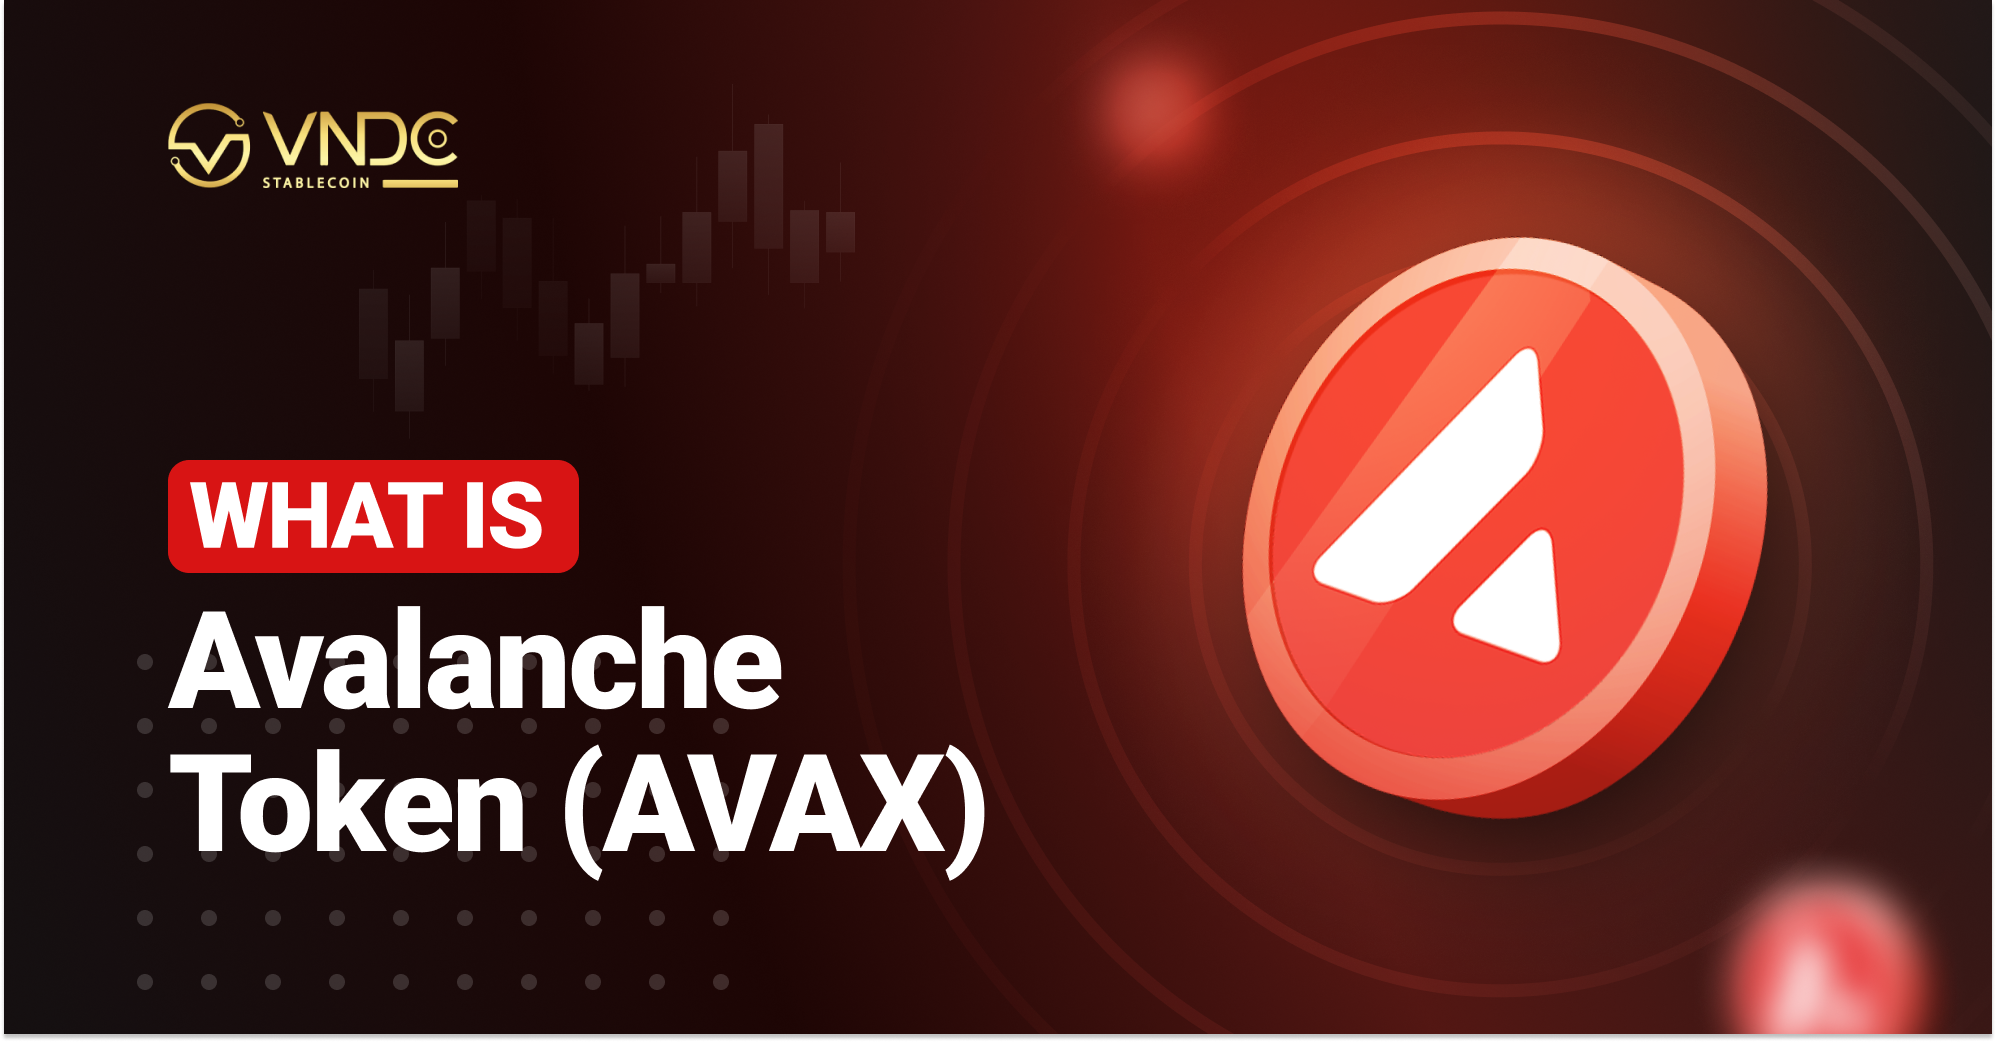 What is Avalanche Token (AVAX)